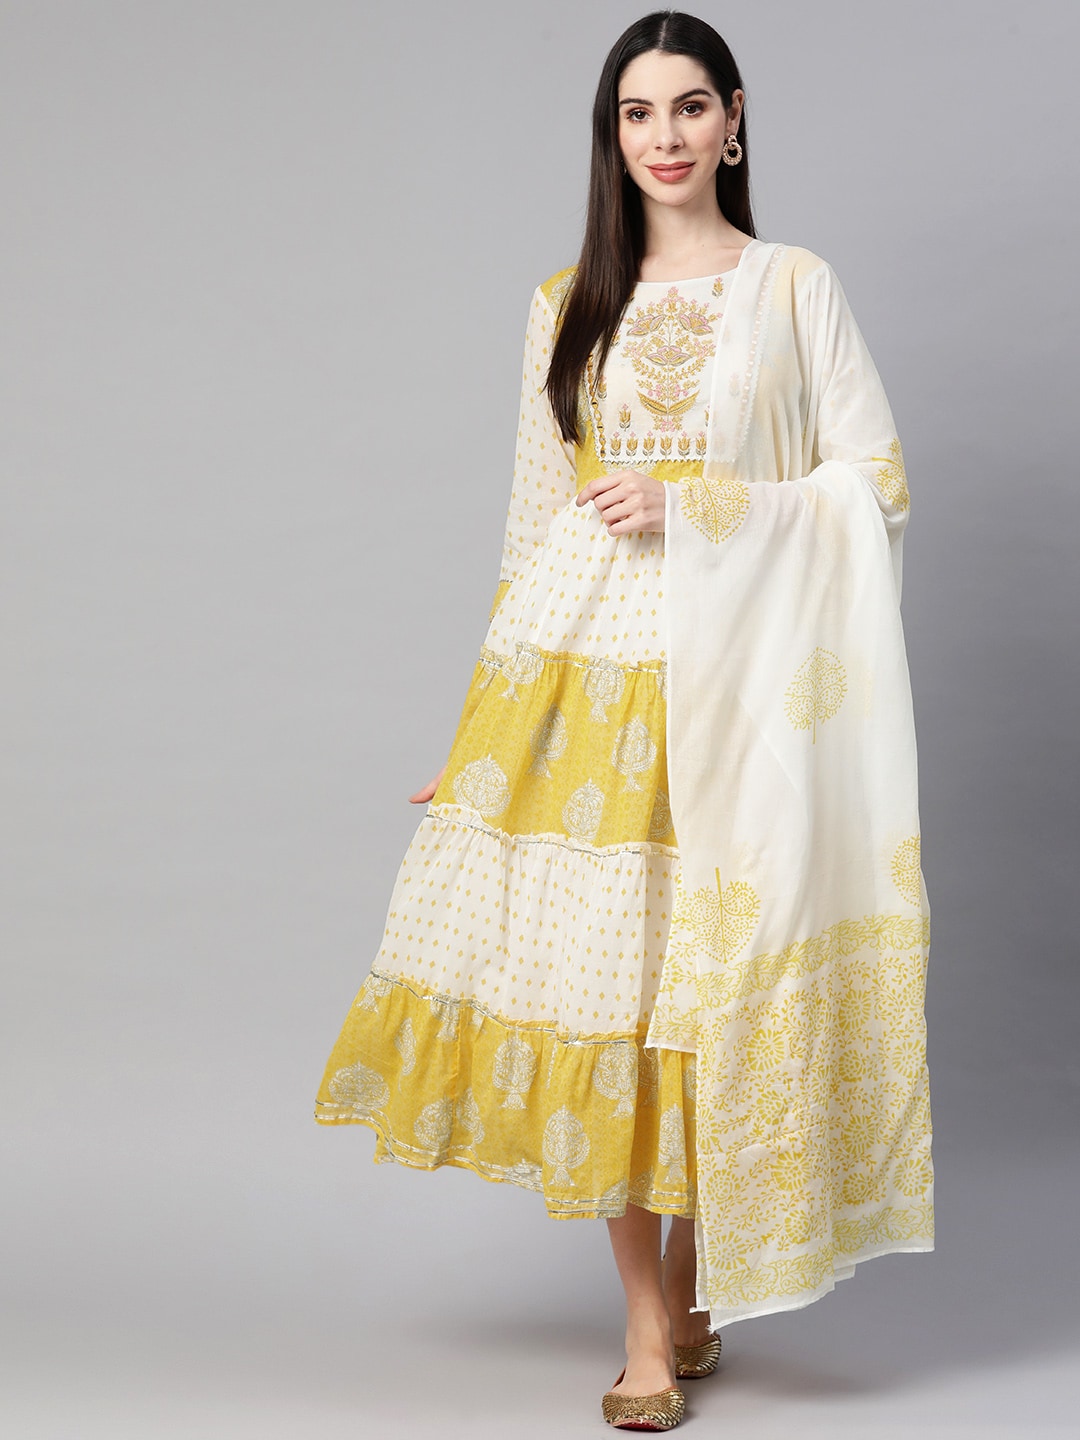 Readiprint Fashions Yellow & White Ethnic Motifs Printed Gown Price in India